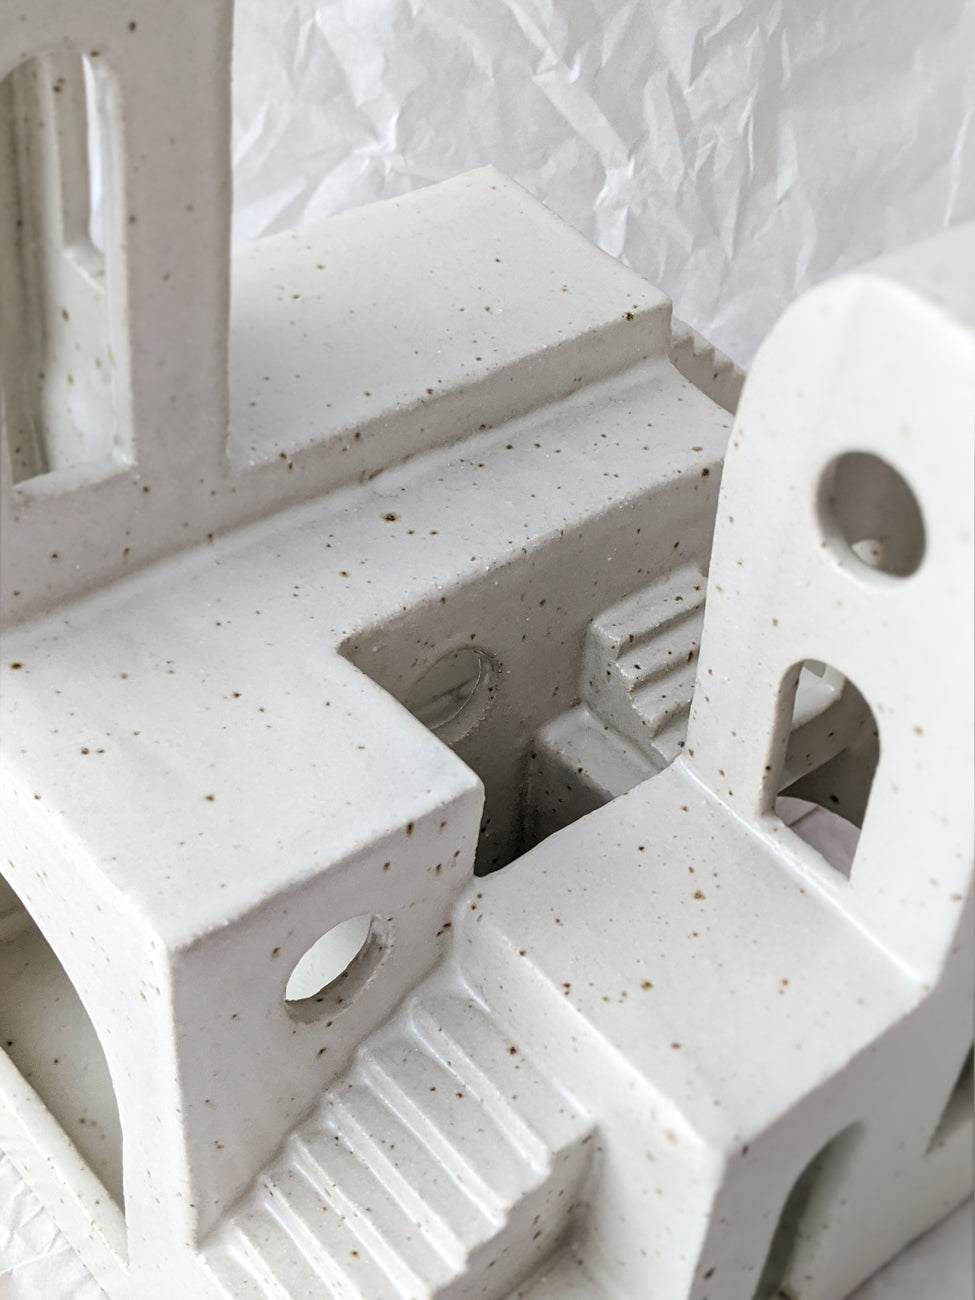 Close up detail of a handmade ceramic sculpture with windows and staircases in speckled cream glaze